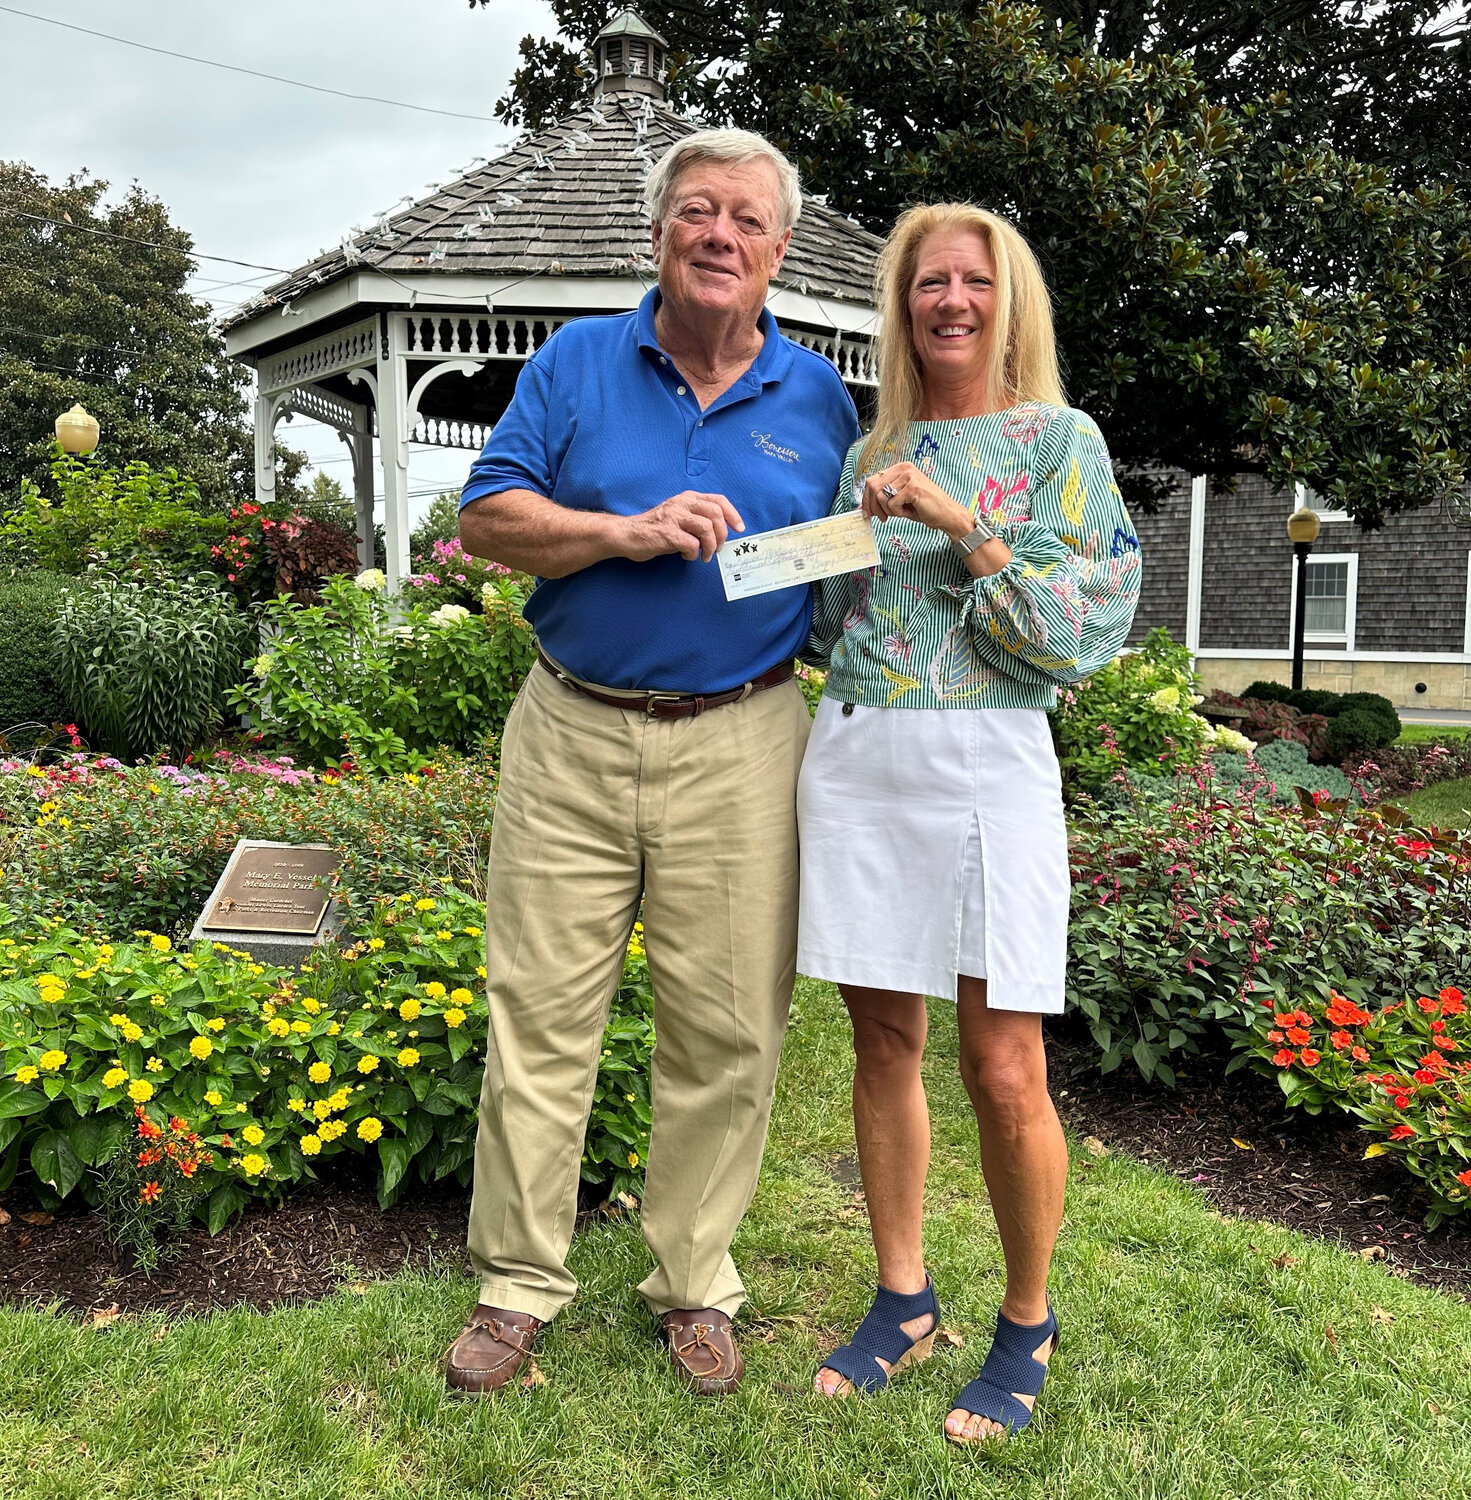 The CAPTRUST Community Foundation and its vice president, Cathy Seeber, supported Sussex Montessori Public Charter School, Seaford, on its annual Giving Day. Ms. Seeber presented a donation of $7,850 to school consultant Mike Rawl. CAPTRUST grants more than $1 million annually from matching contributions by its advisers to assist children’s causes.